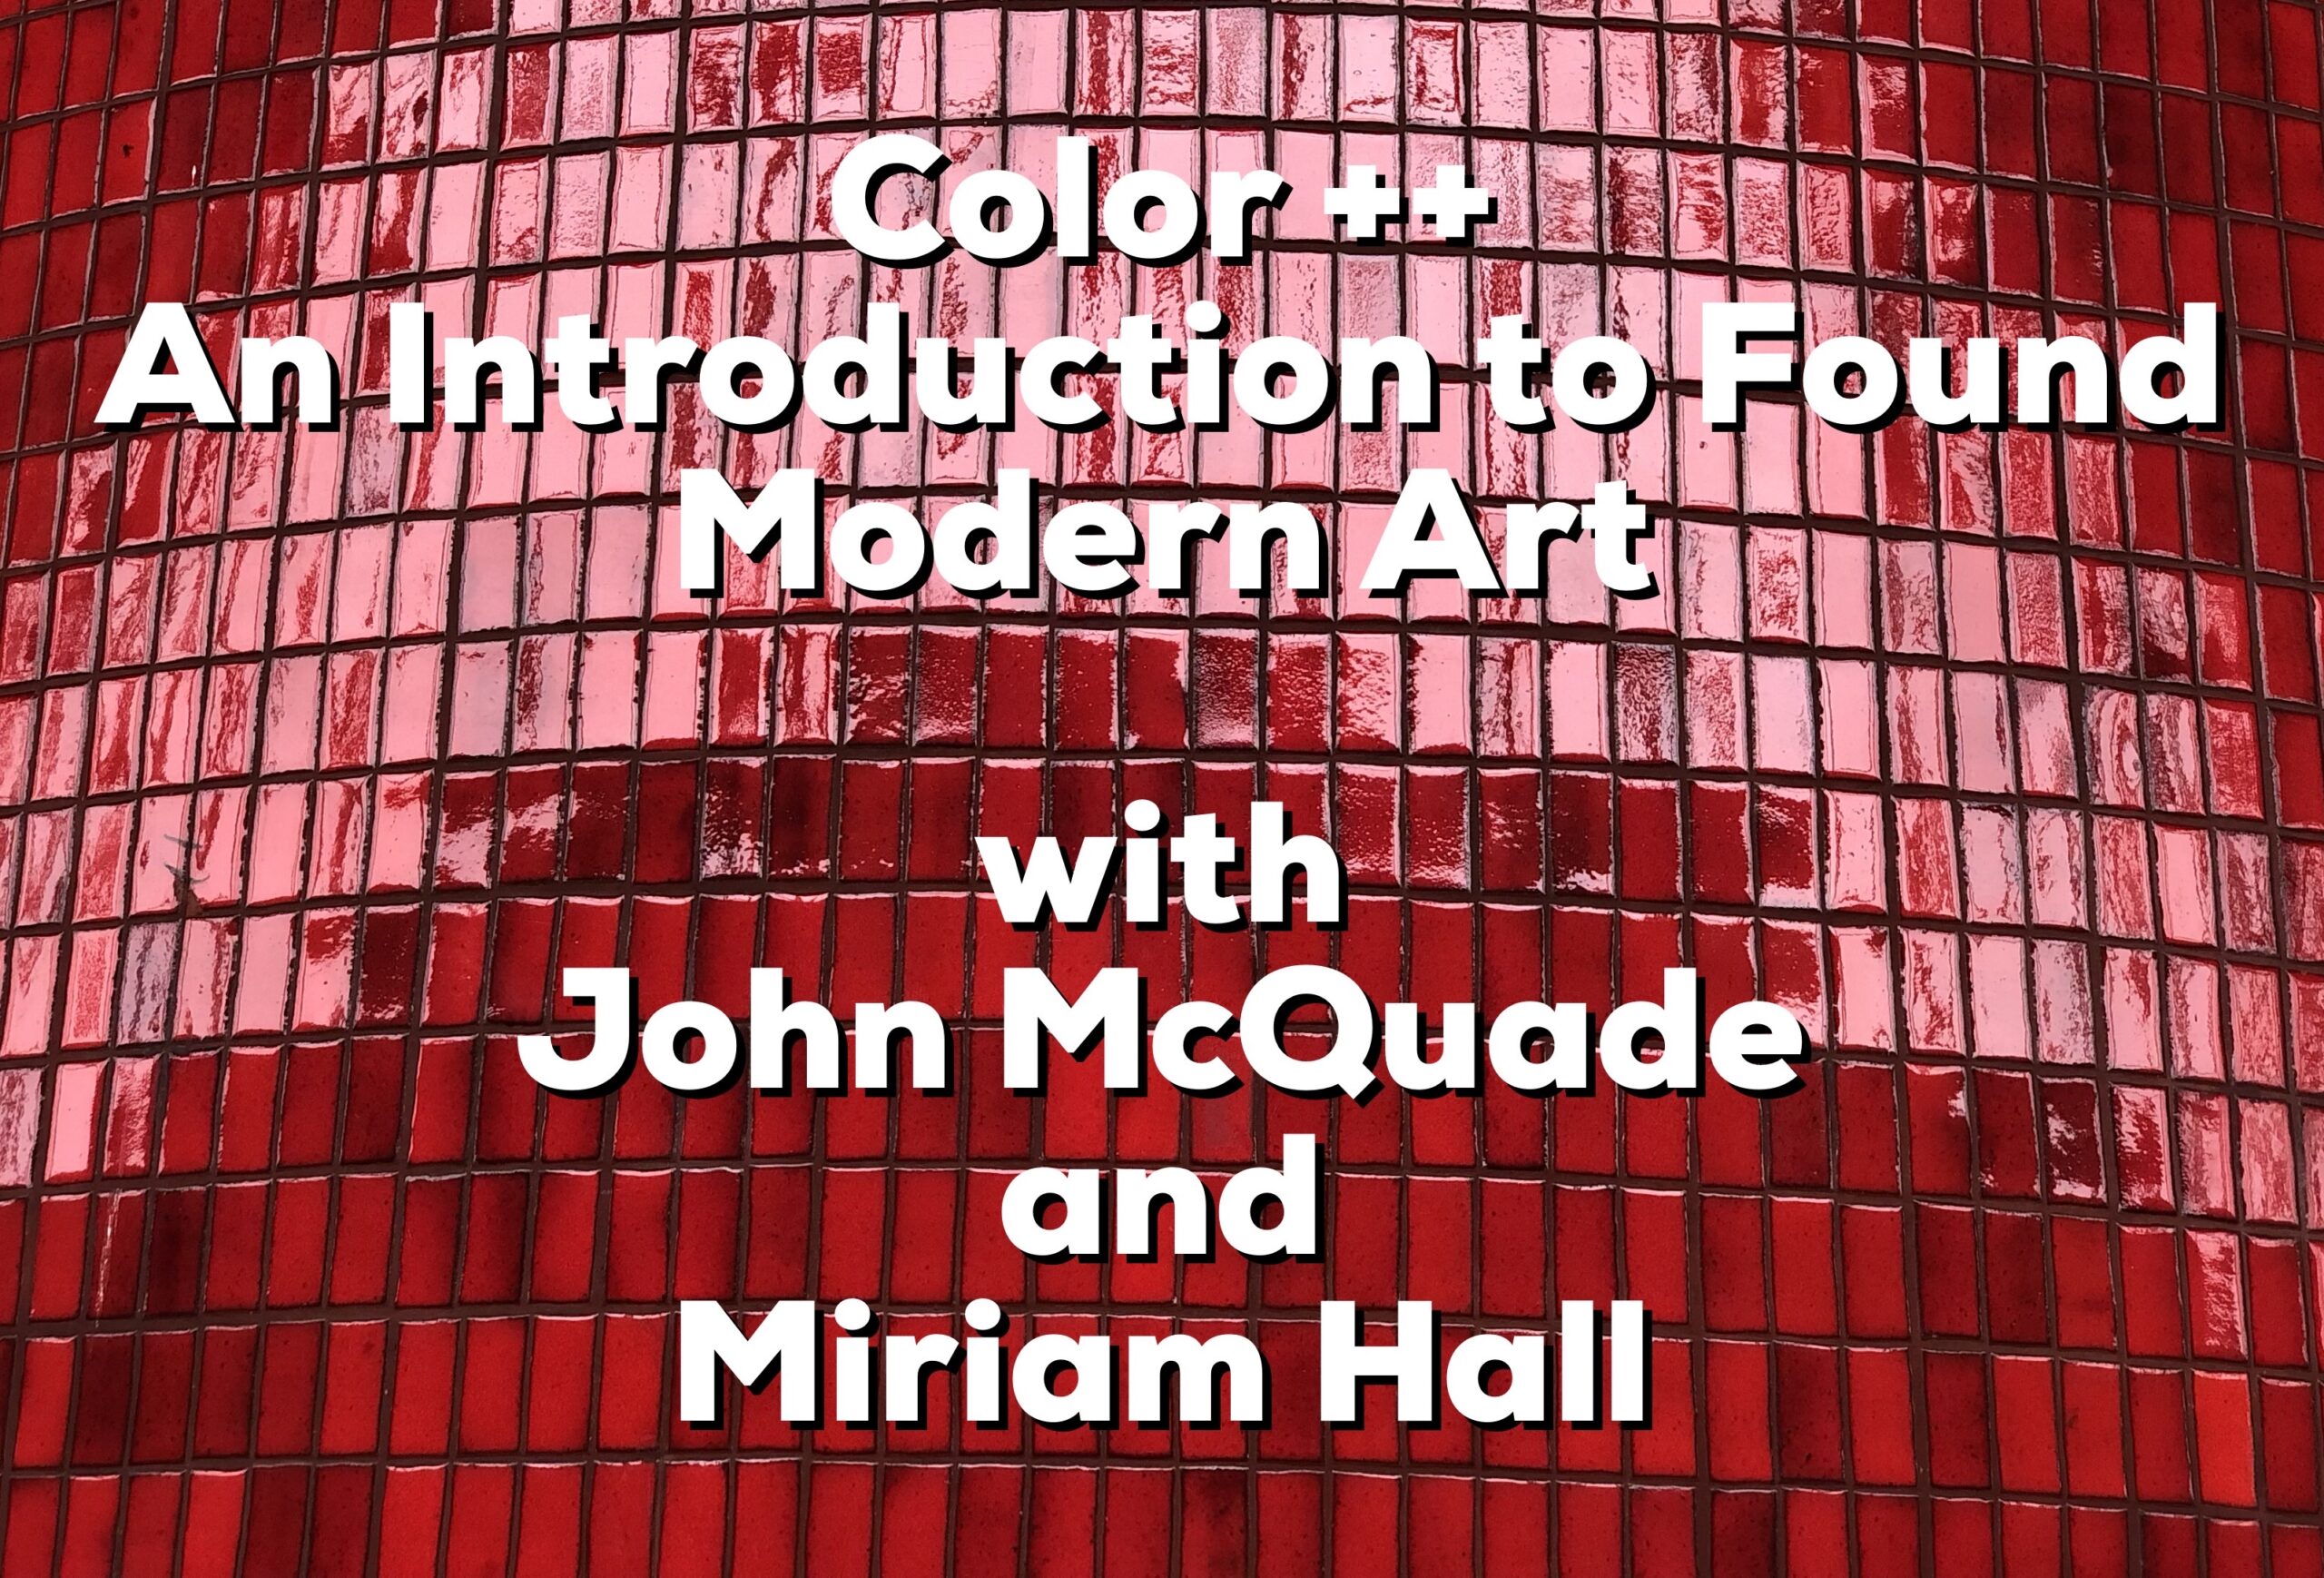 color plus plus - introduction to found modern art - miksang contemplative photography - John Mc Quade and Miriam Hall